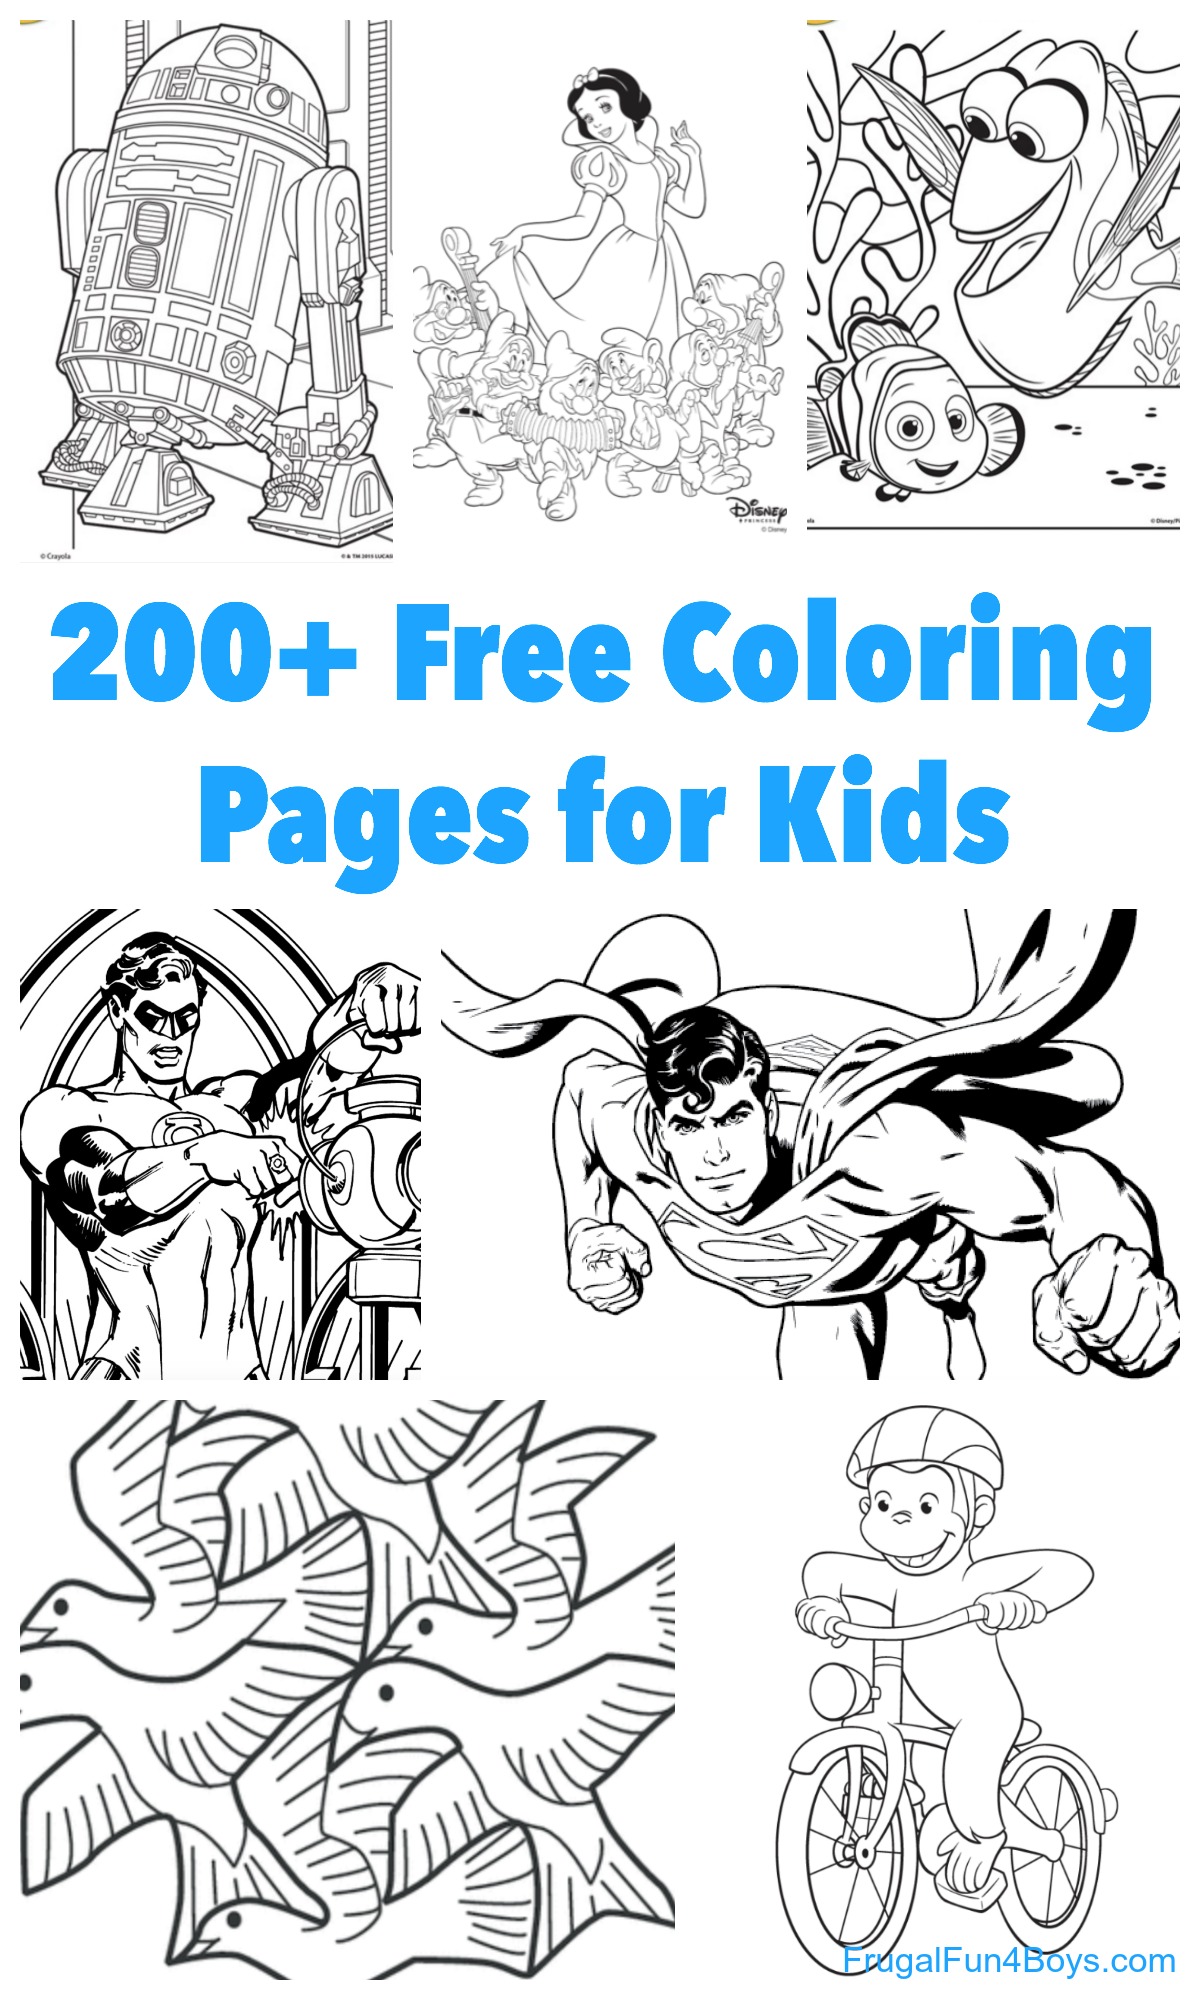 Free Printable Drawings For Kids at PaintingValley.com | Explore